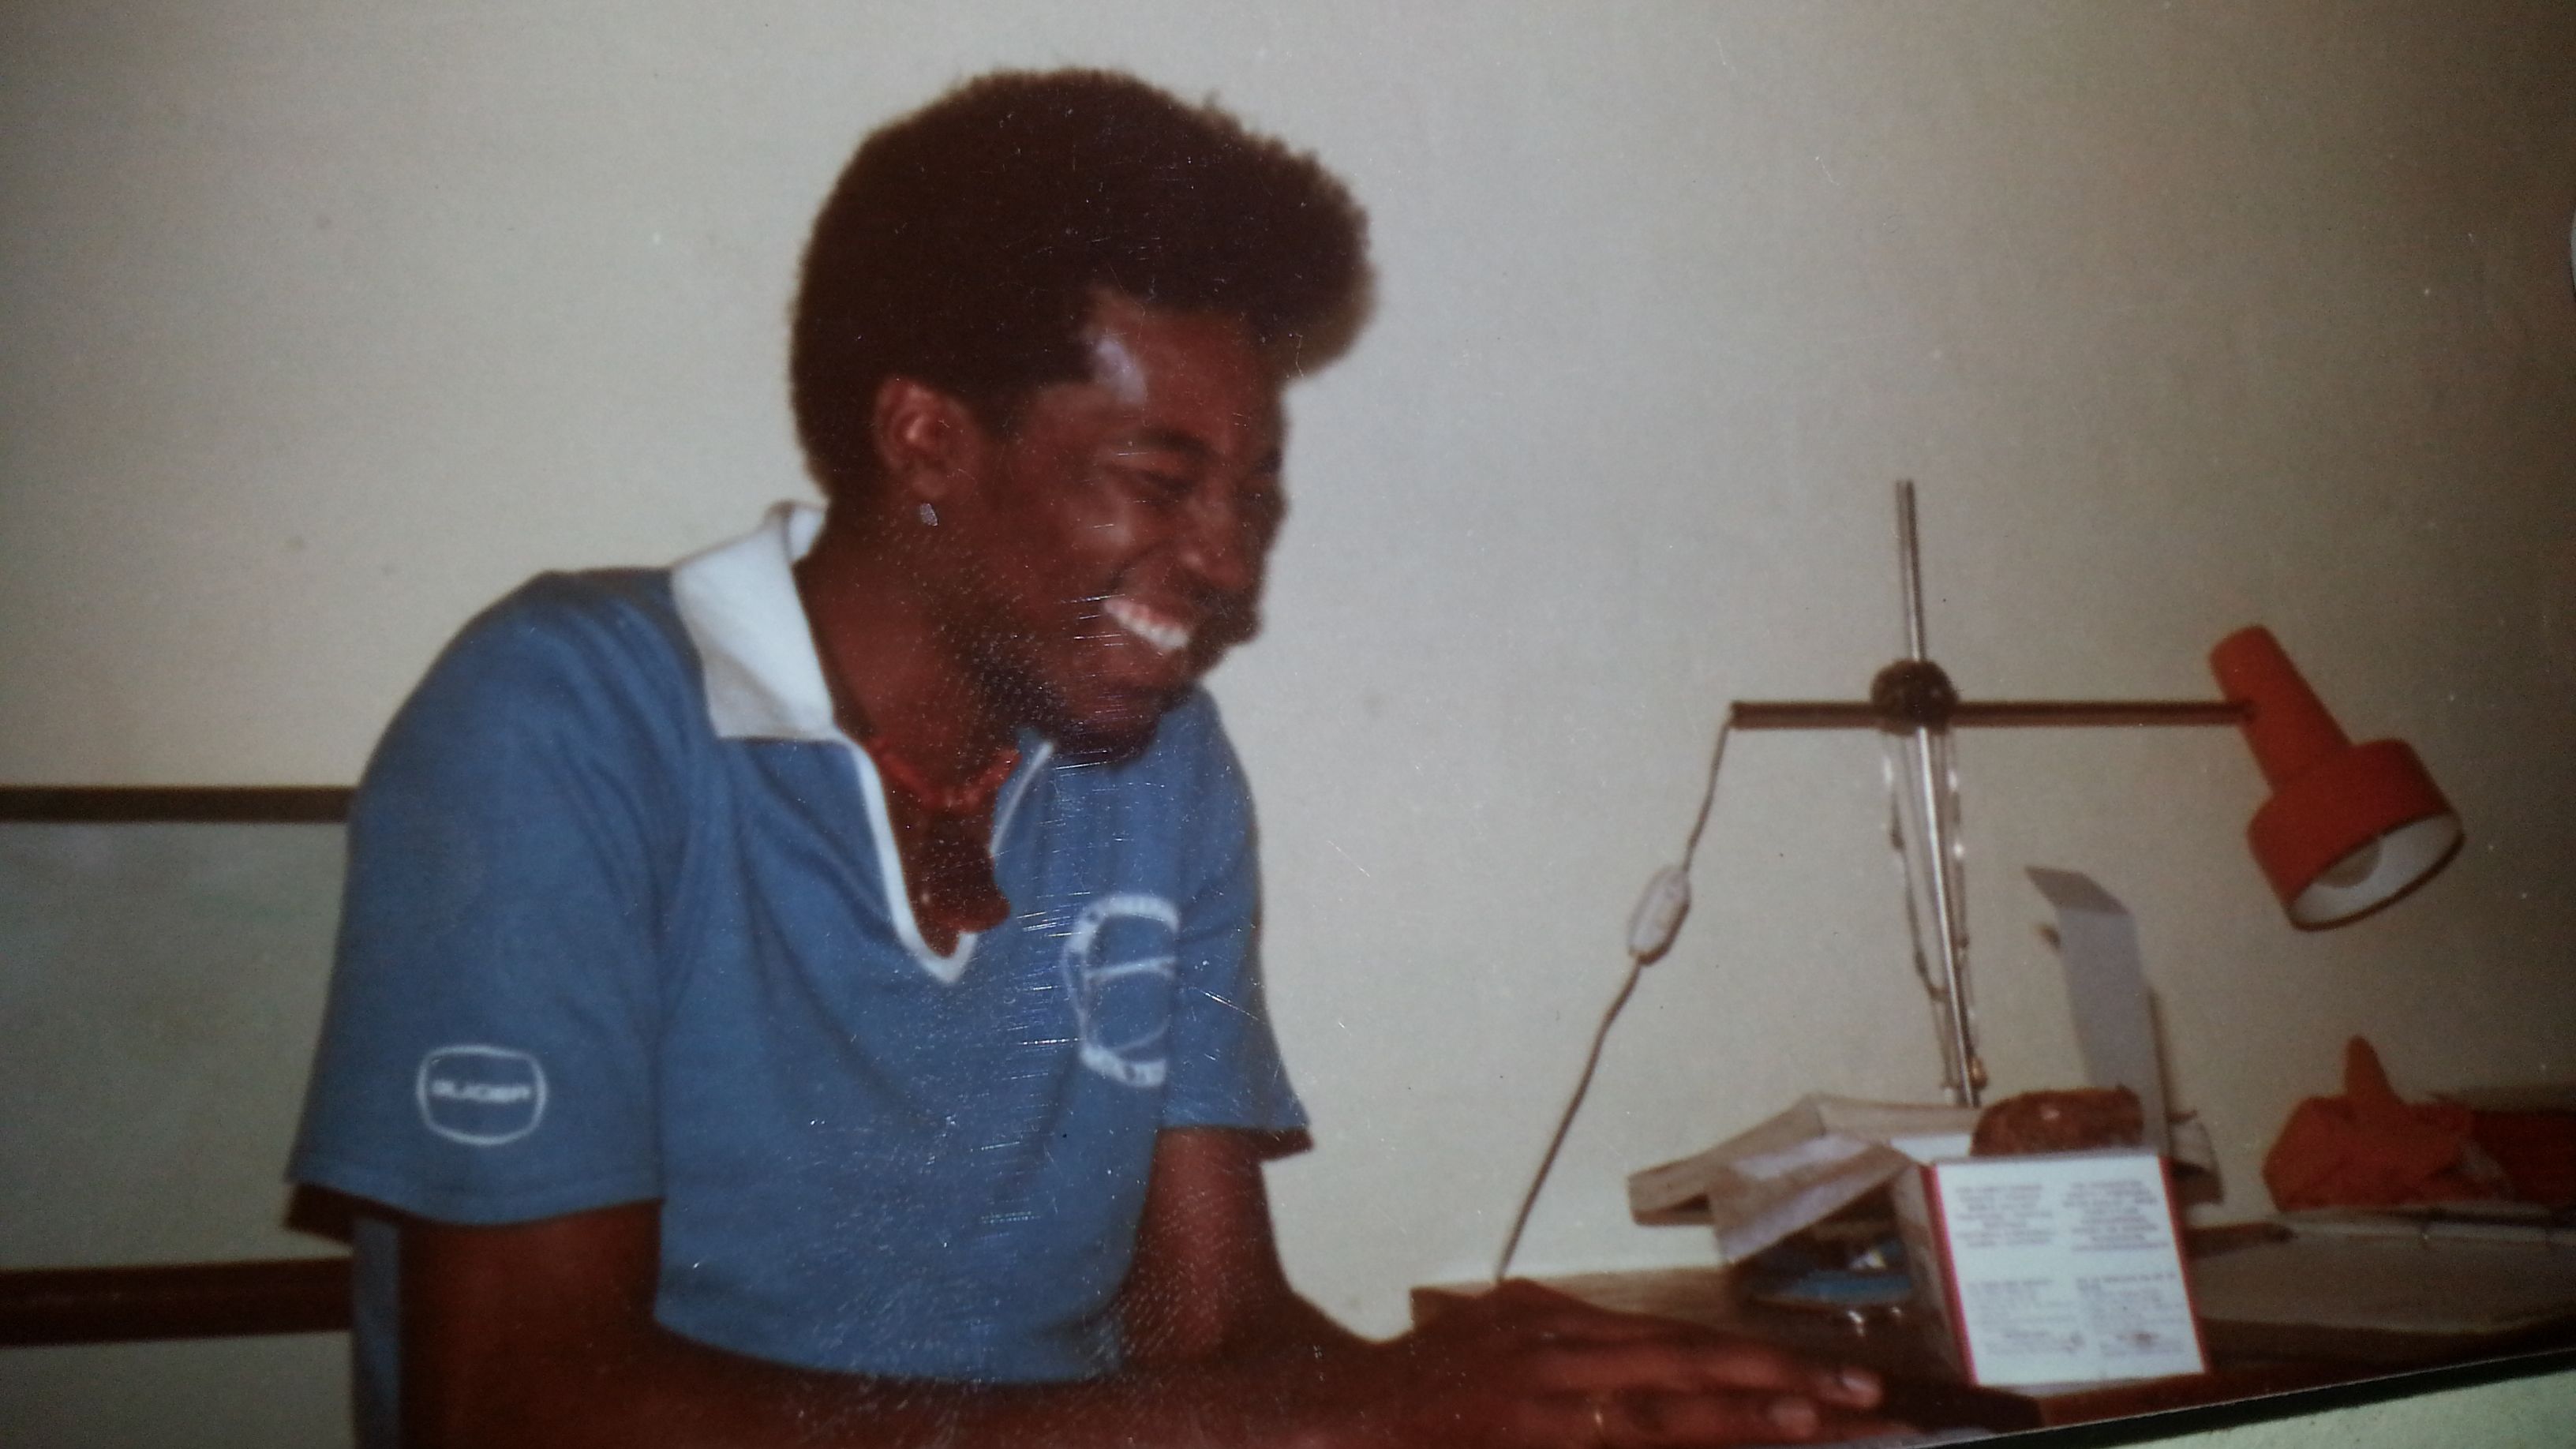 Luyanda Mpahlwa at a drafting table in class at Technikon Natal (now the Durban University of Technology) in 1980.